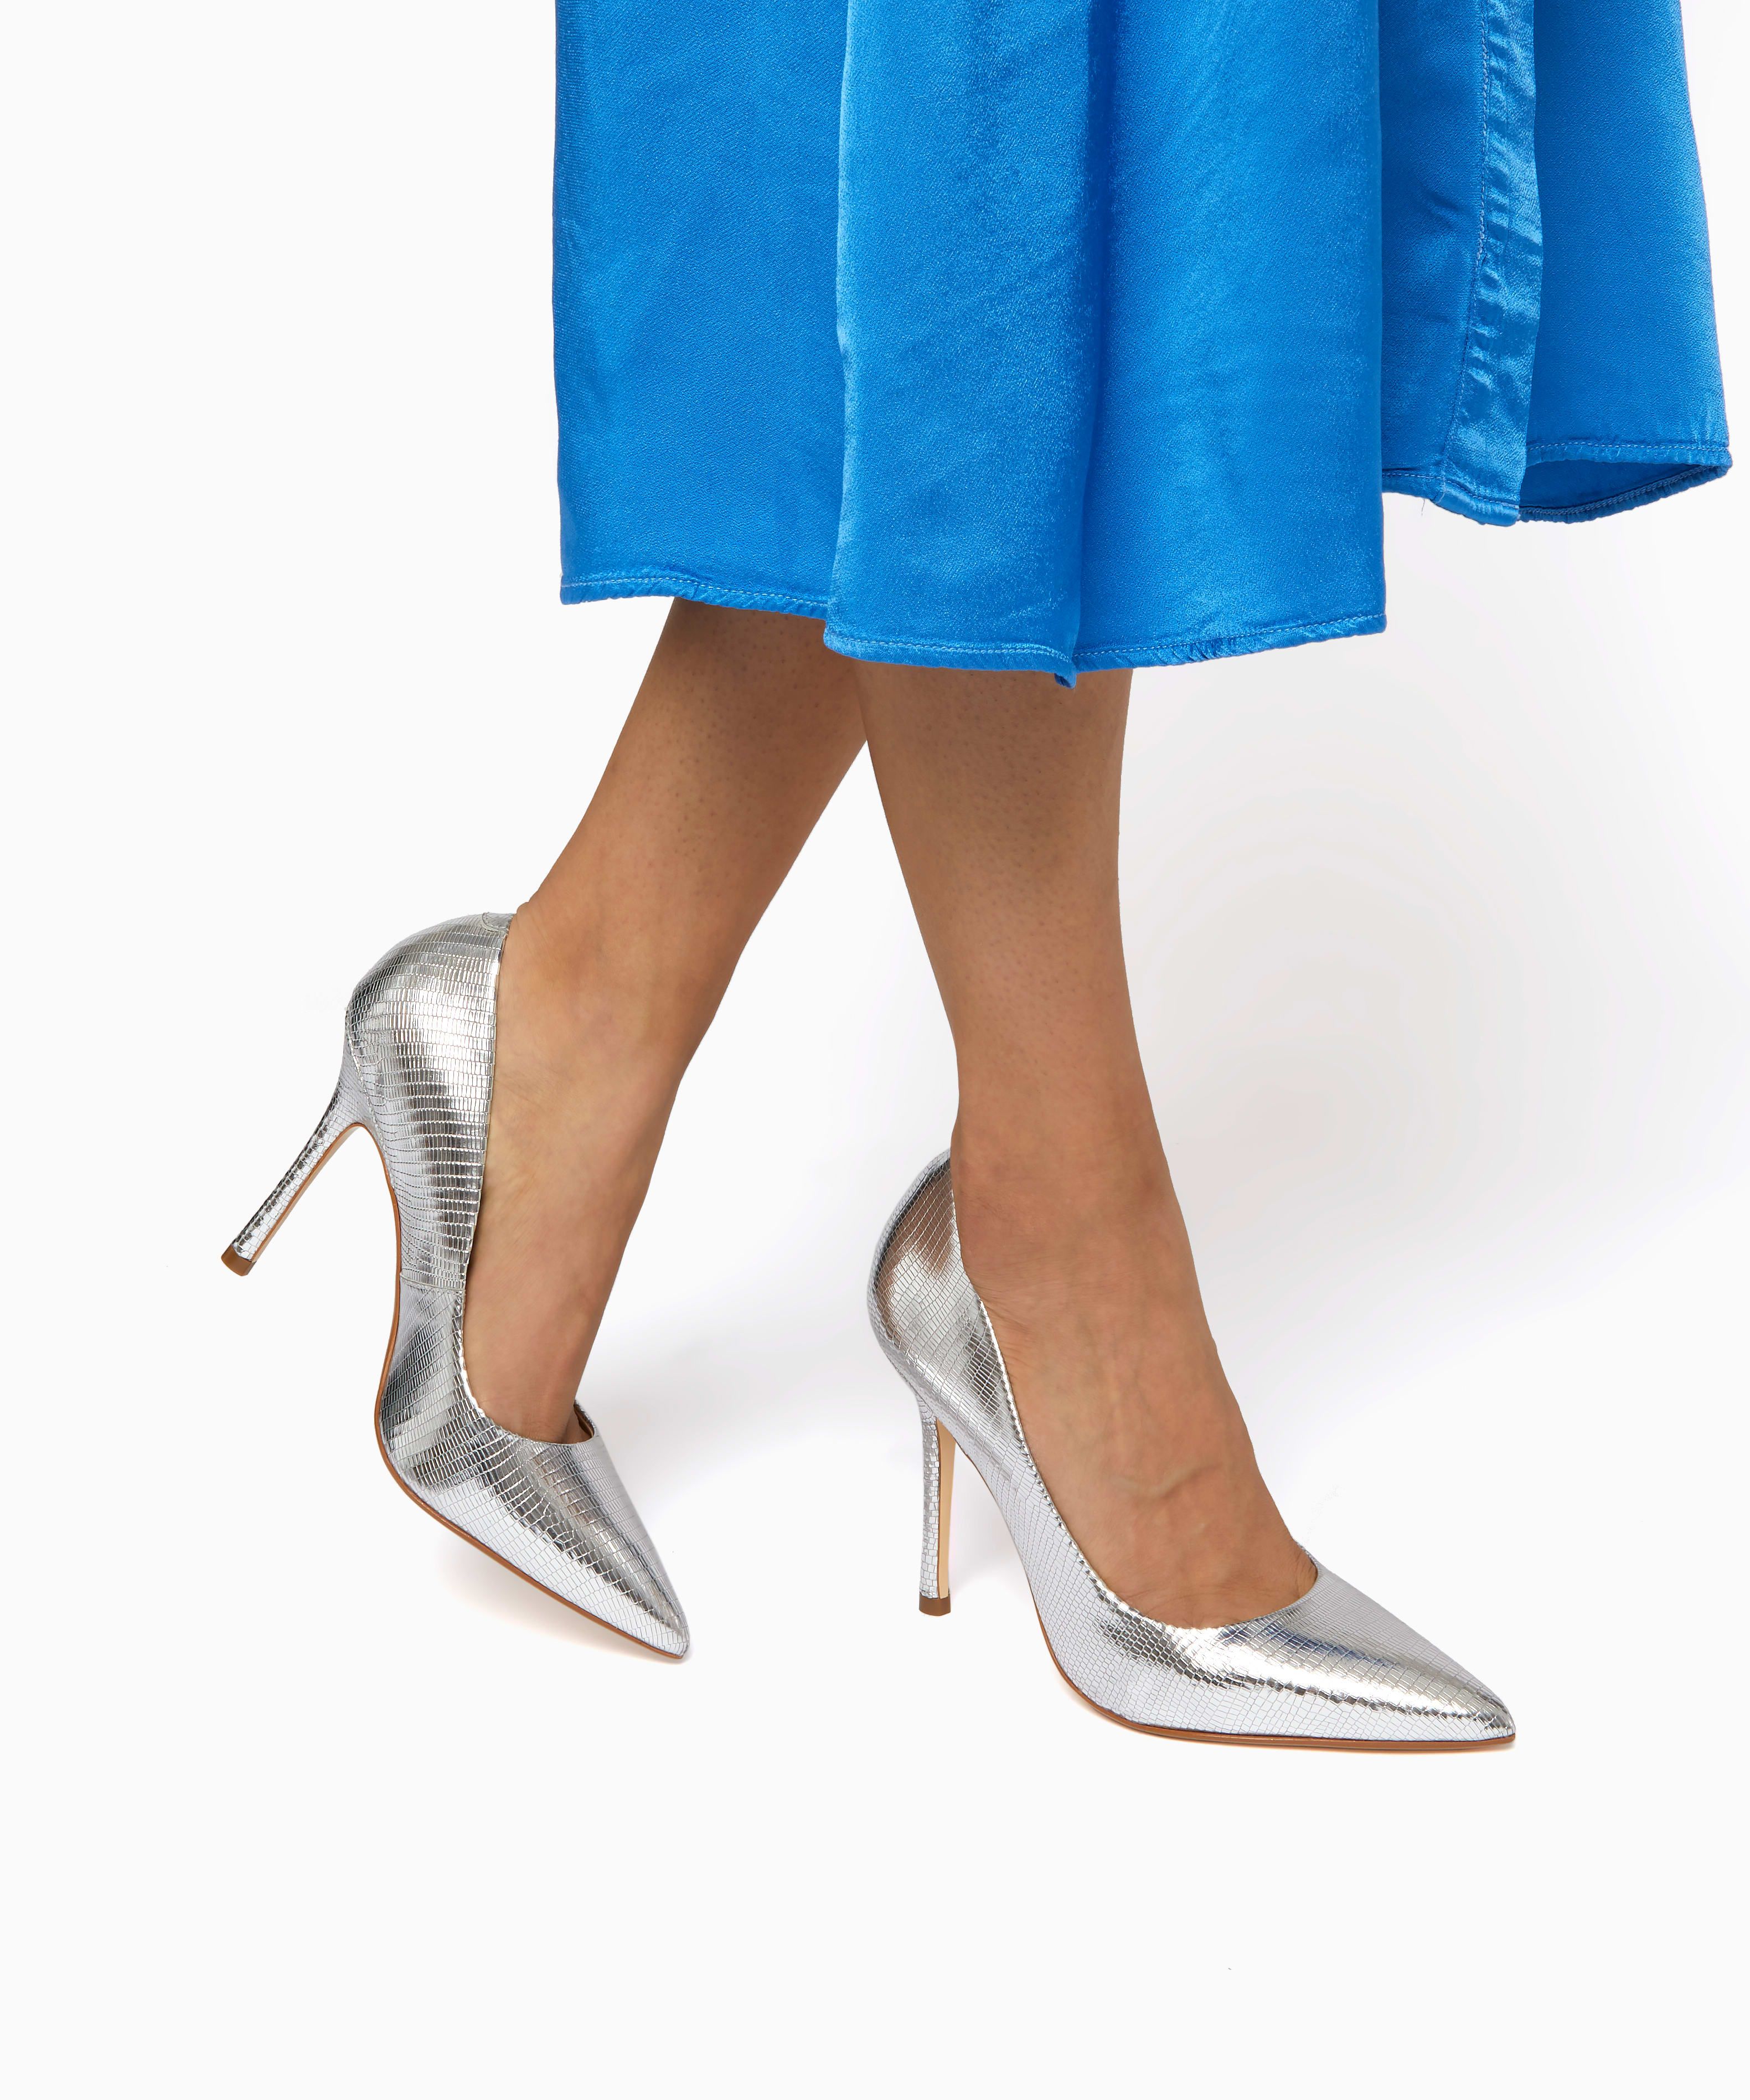 Office or going out, these heels are the perfect styles to elevate your outfit. Working on a classic court style with a sophisticated pointed to, they rest on a slim stiletto heel for an effortlessly chic finish.